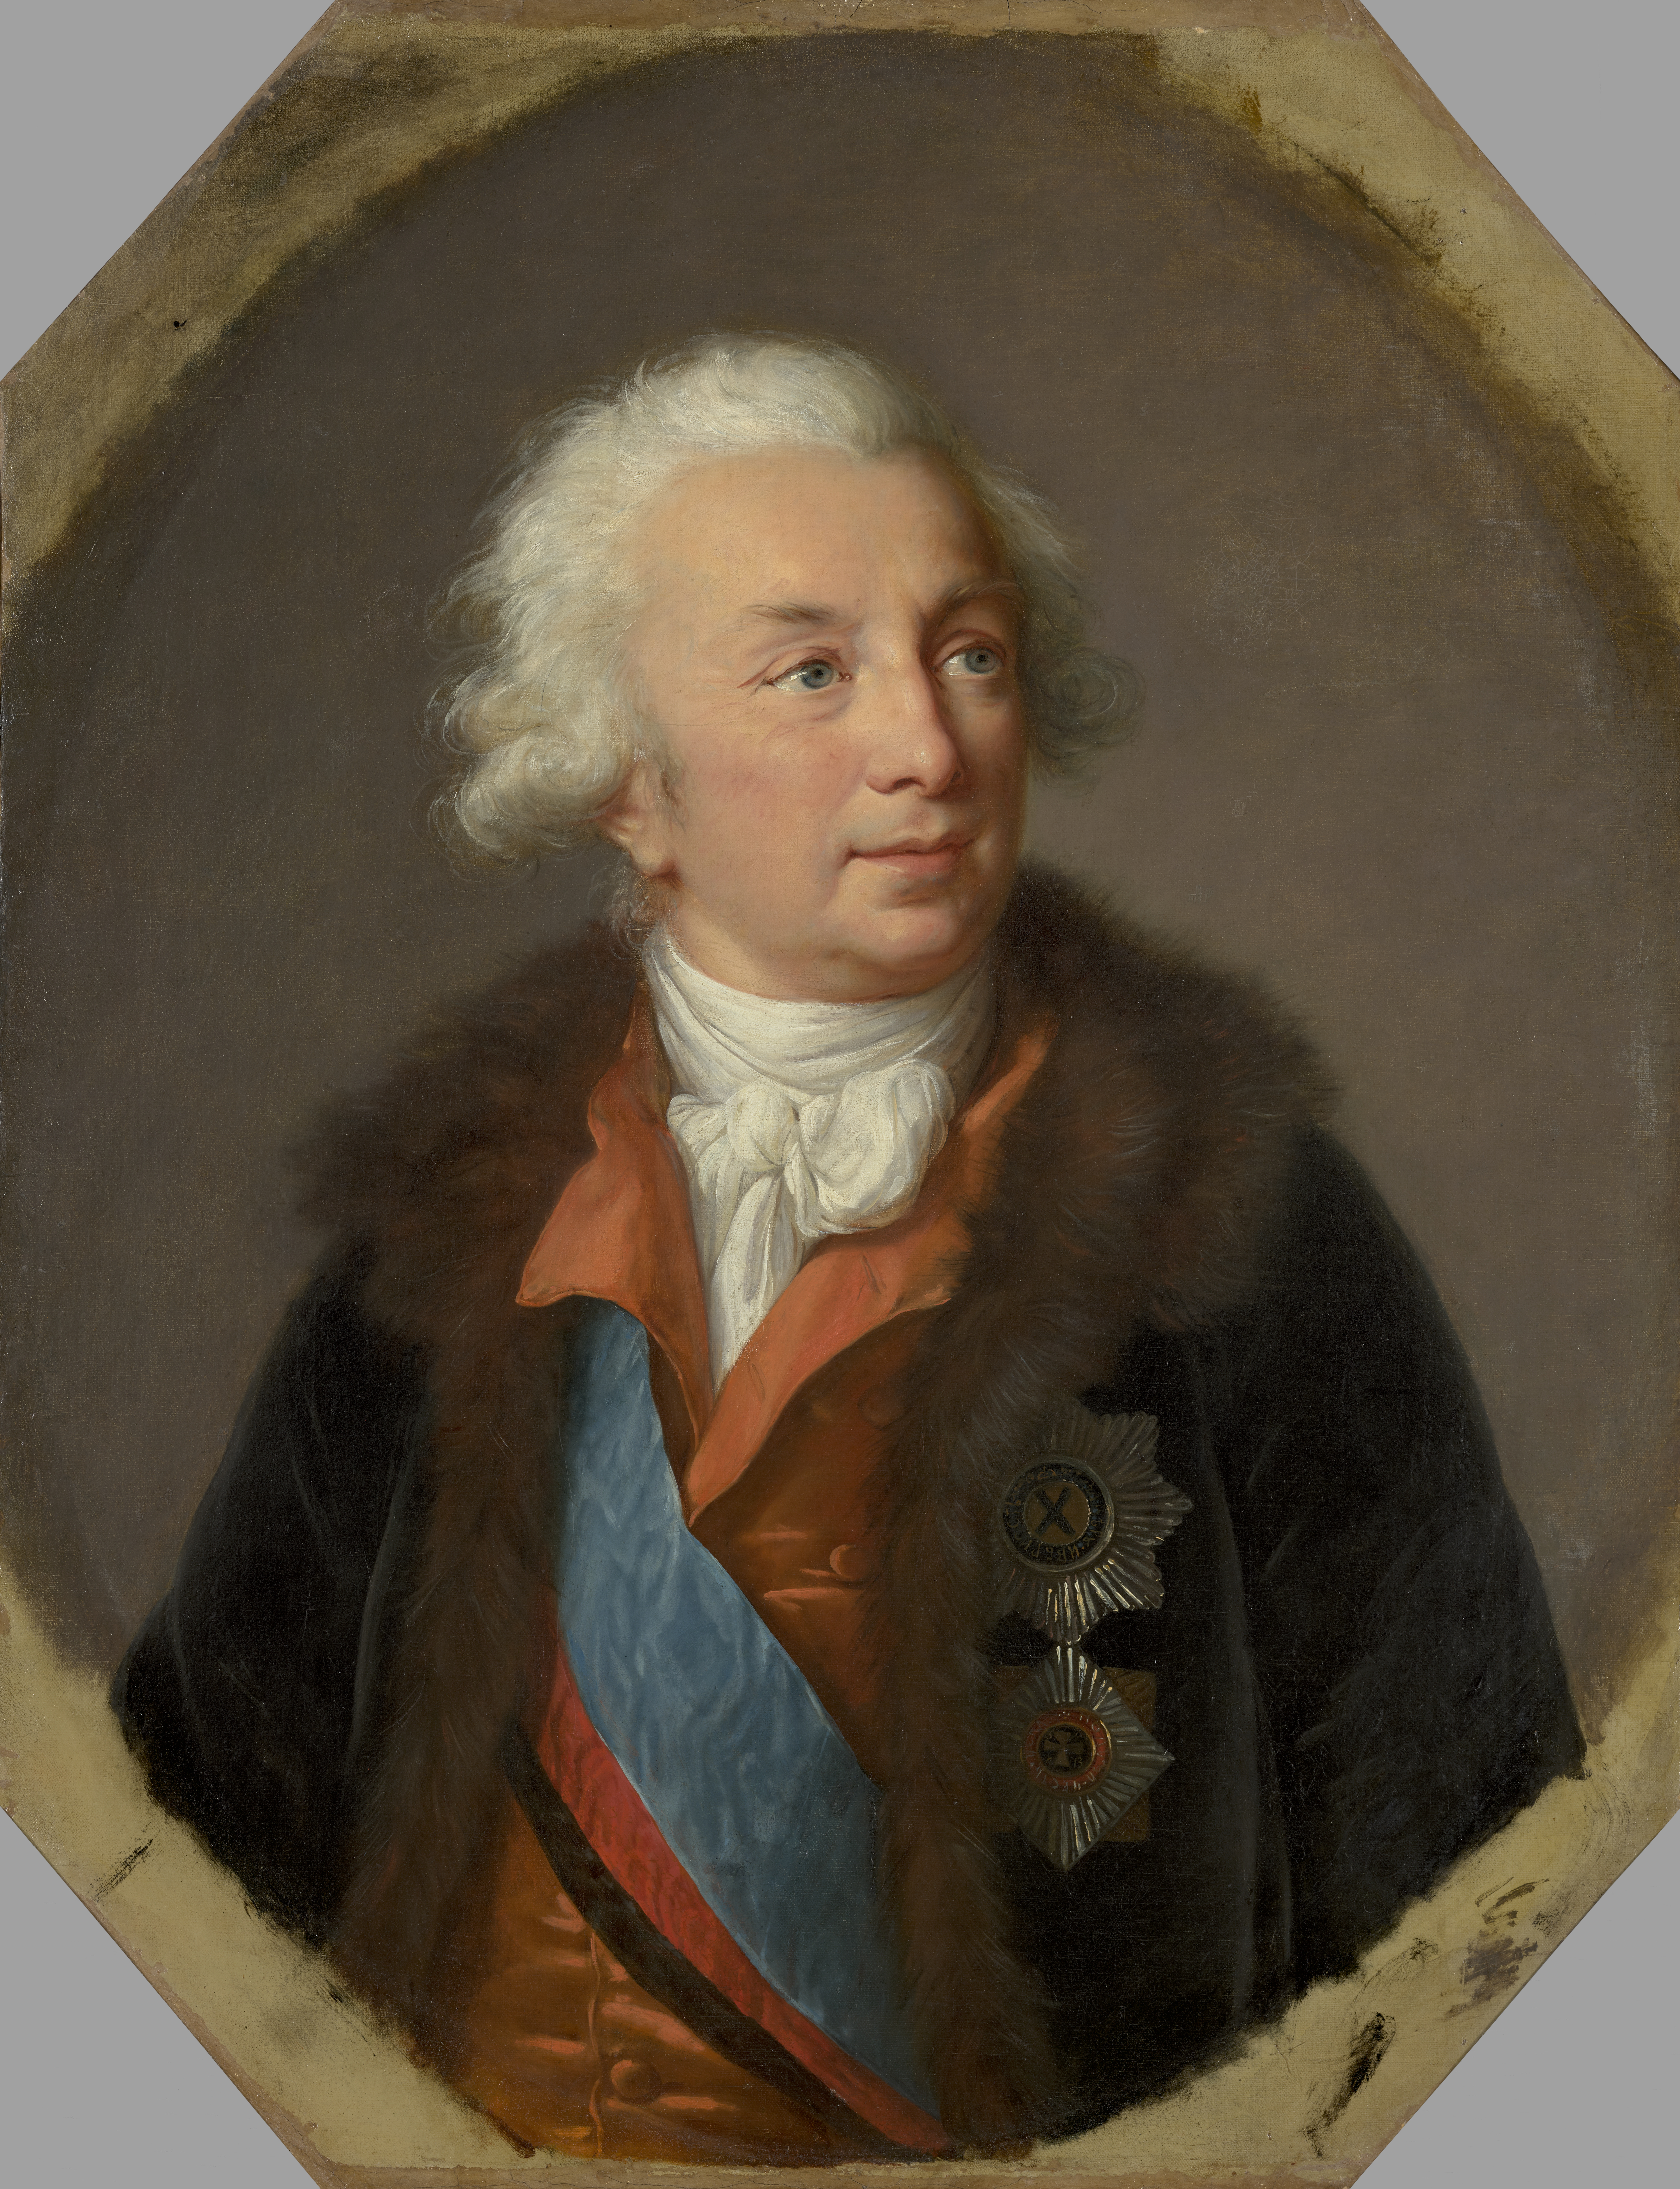 An oil painting of a white-haired man in front of a brownish gray background. He is wearing a white neck scarf, a red-orange vest, a blue, red, and black-striped sash, and dark brown fur coat with two silver medallions pinned to it.